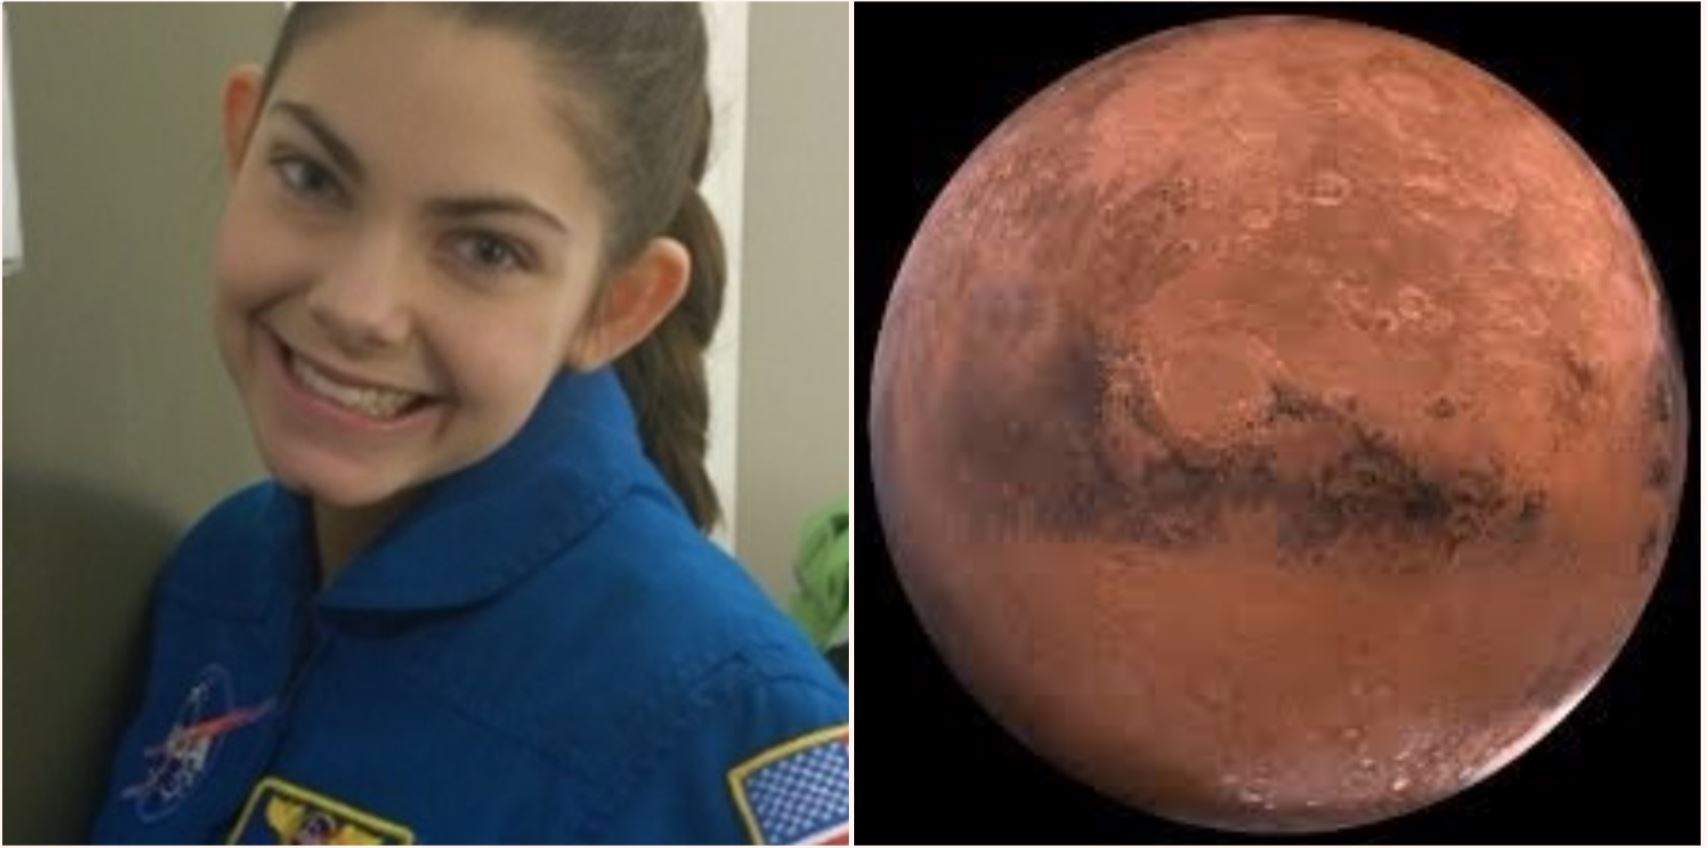 NASA preparing 17-year-old girl to become first human to reach Mars